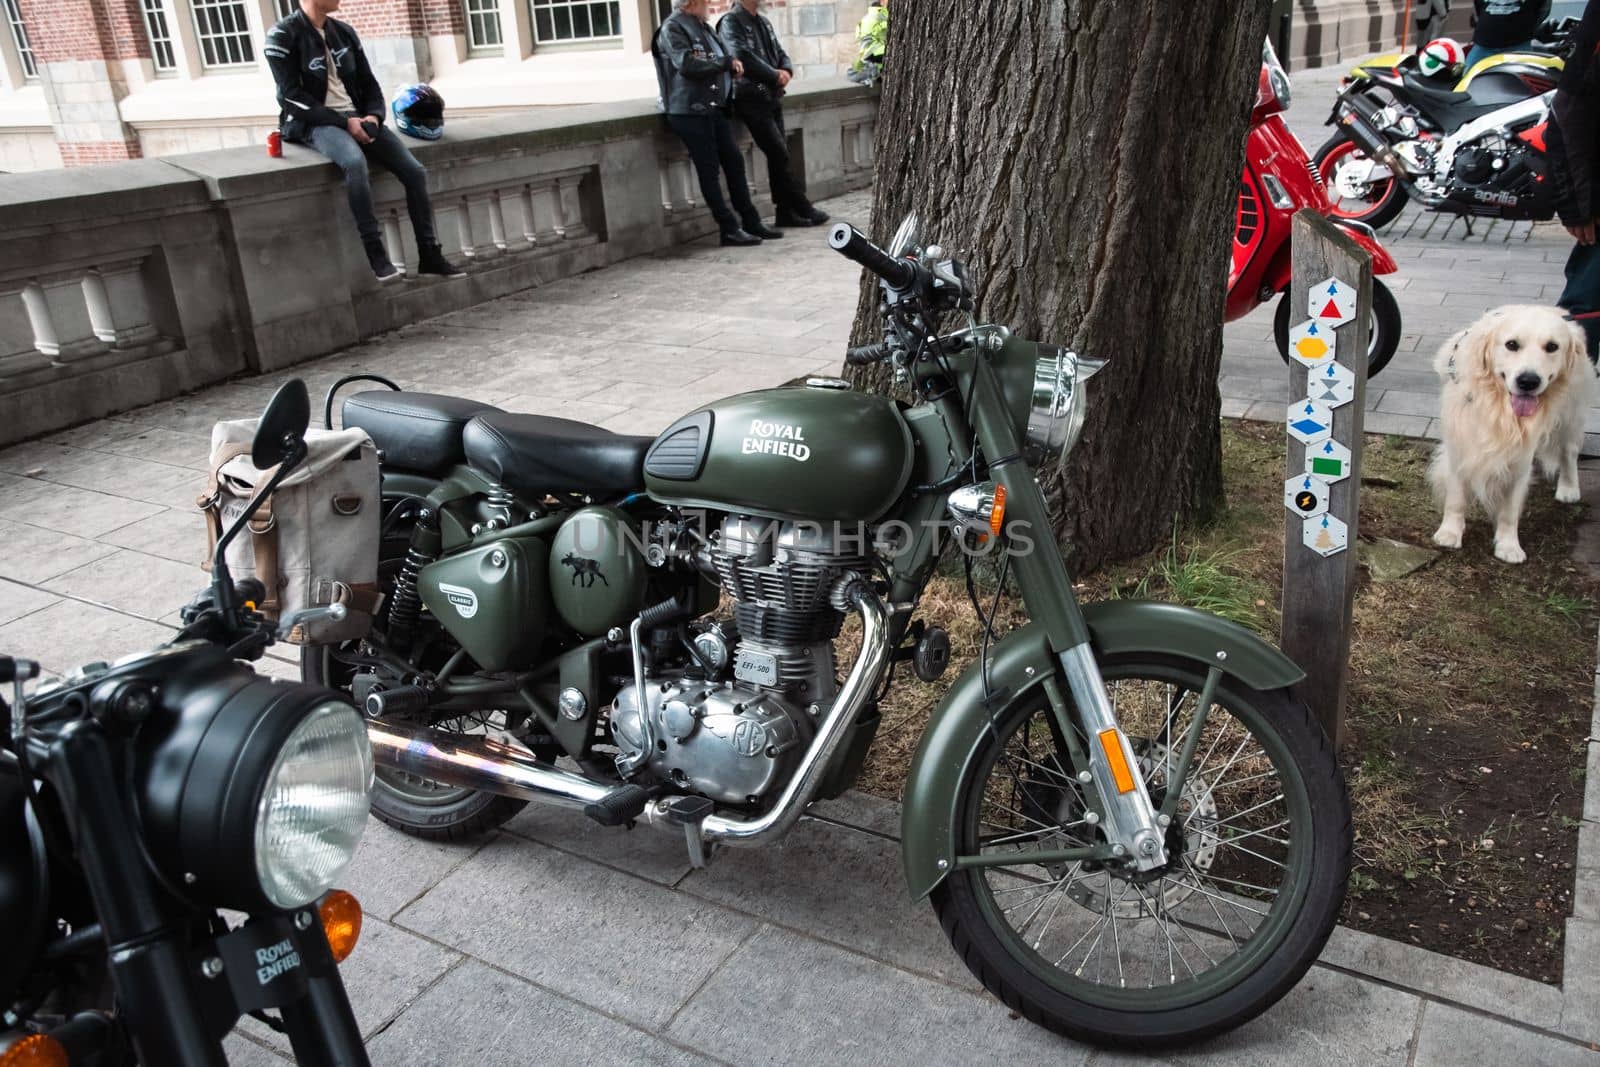 Genk, BELGIUM, August 18, 2021: classic show bikes in Thor Park, royal enfield green motorcycle, High quality photo